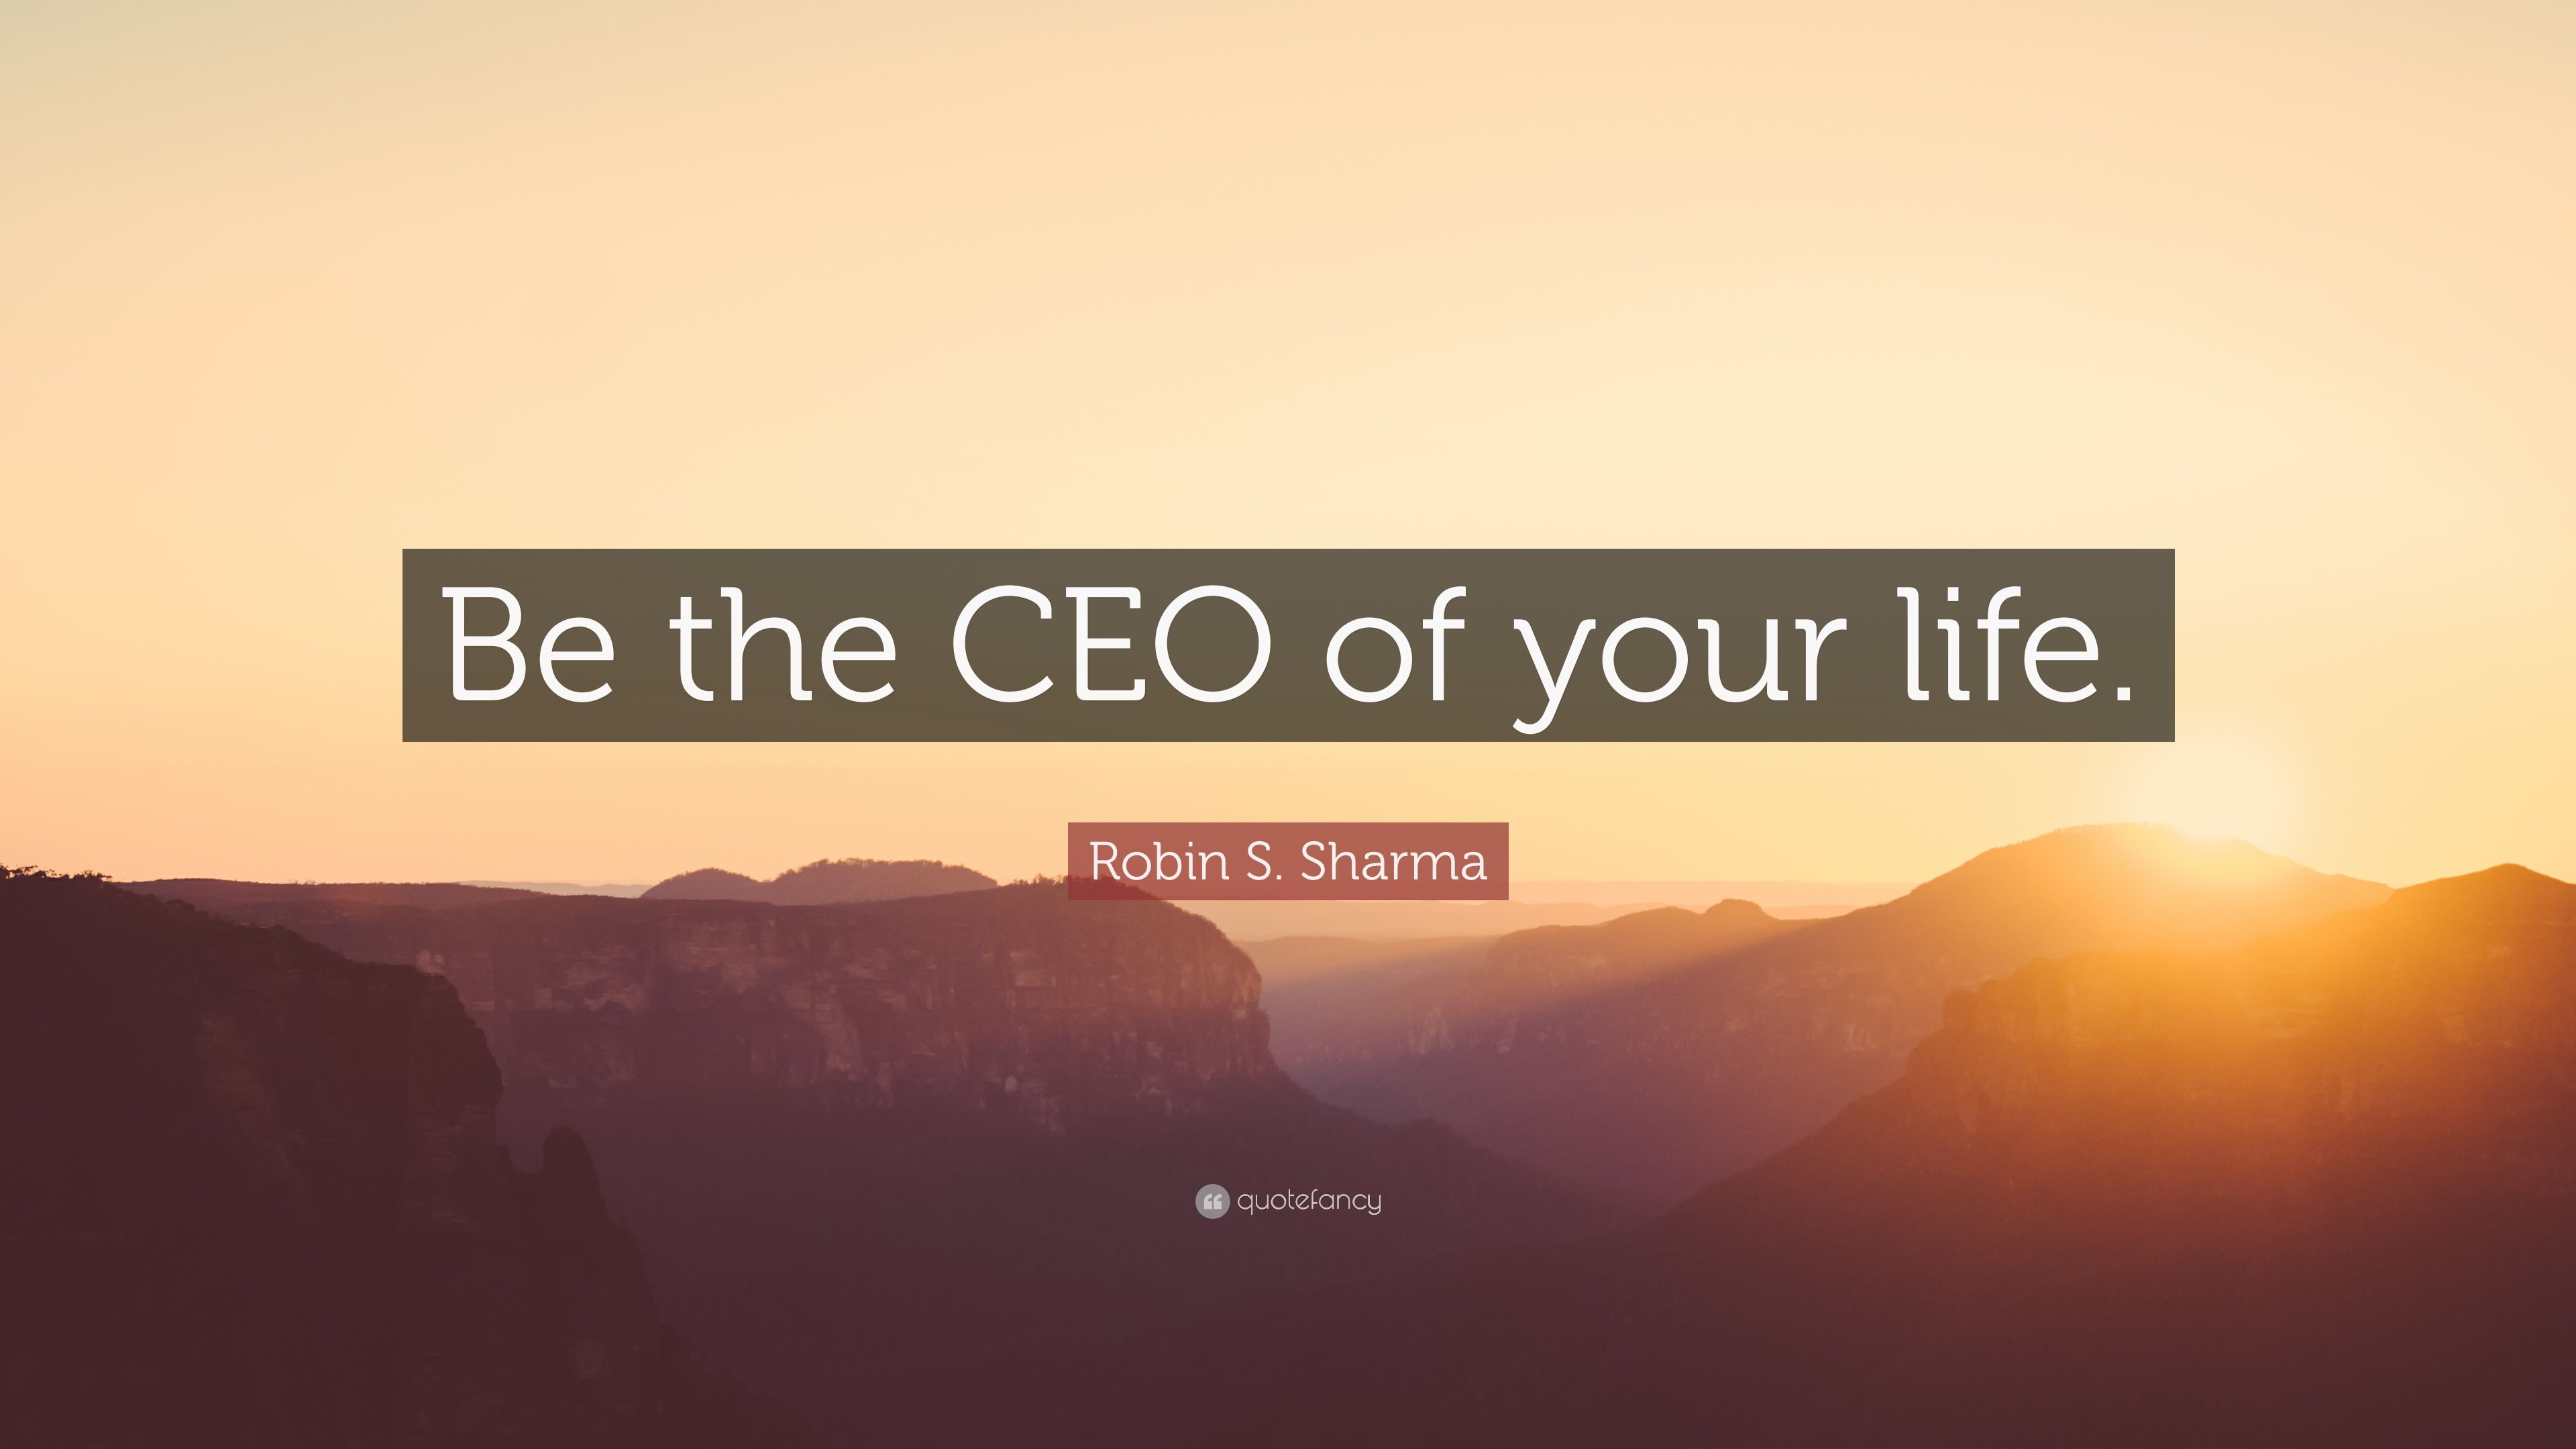 Robin S. Sharma Quote: “Be the CEO of your life.” (22 wallpaper)